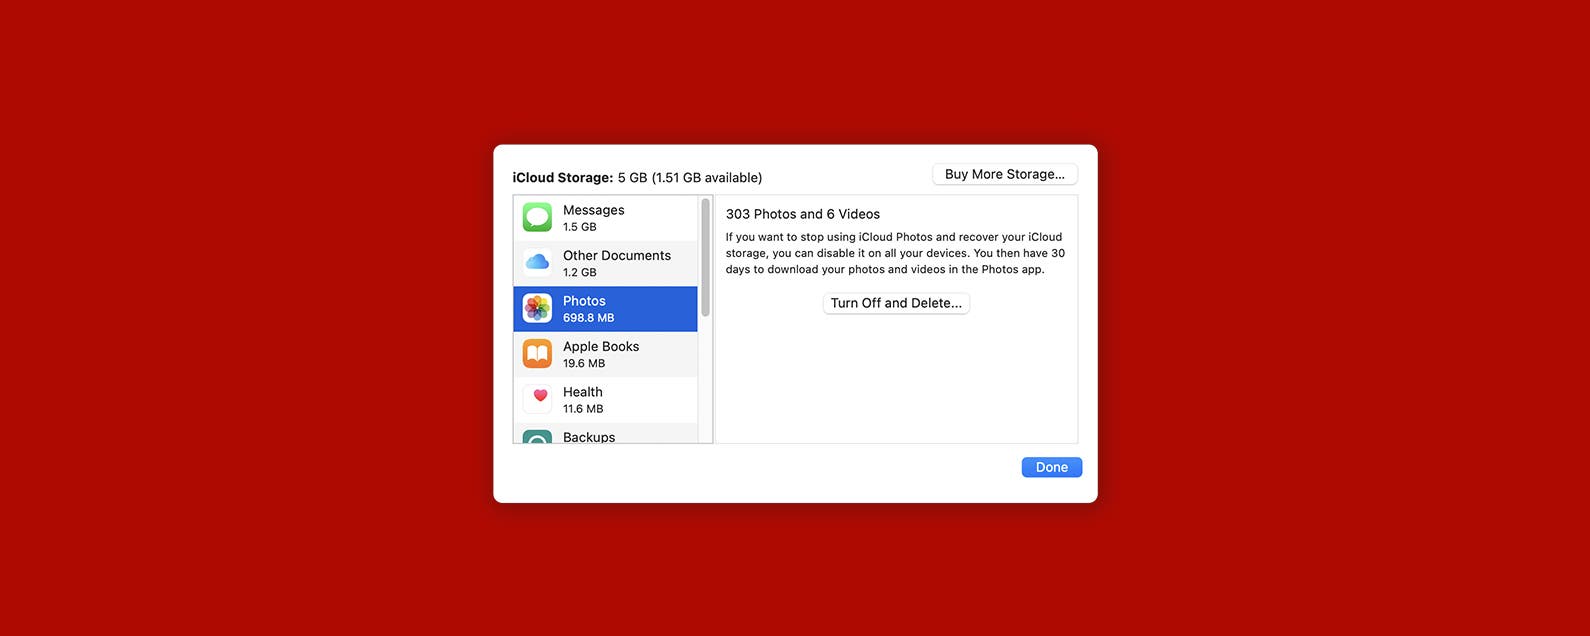 Setting up an Apple backup through iCloud is probably the simplest option you have available. Each user gets 5 GB of free iCloud storage with their Ap